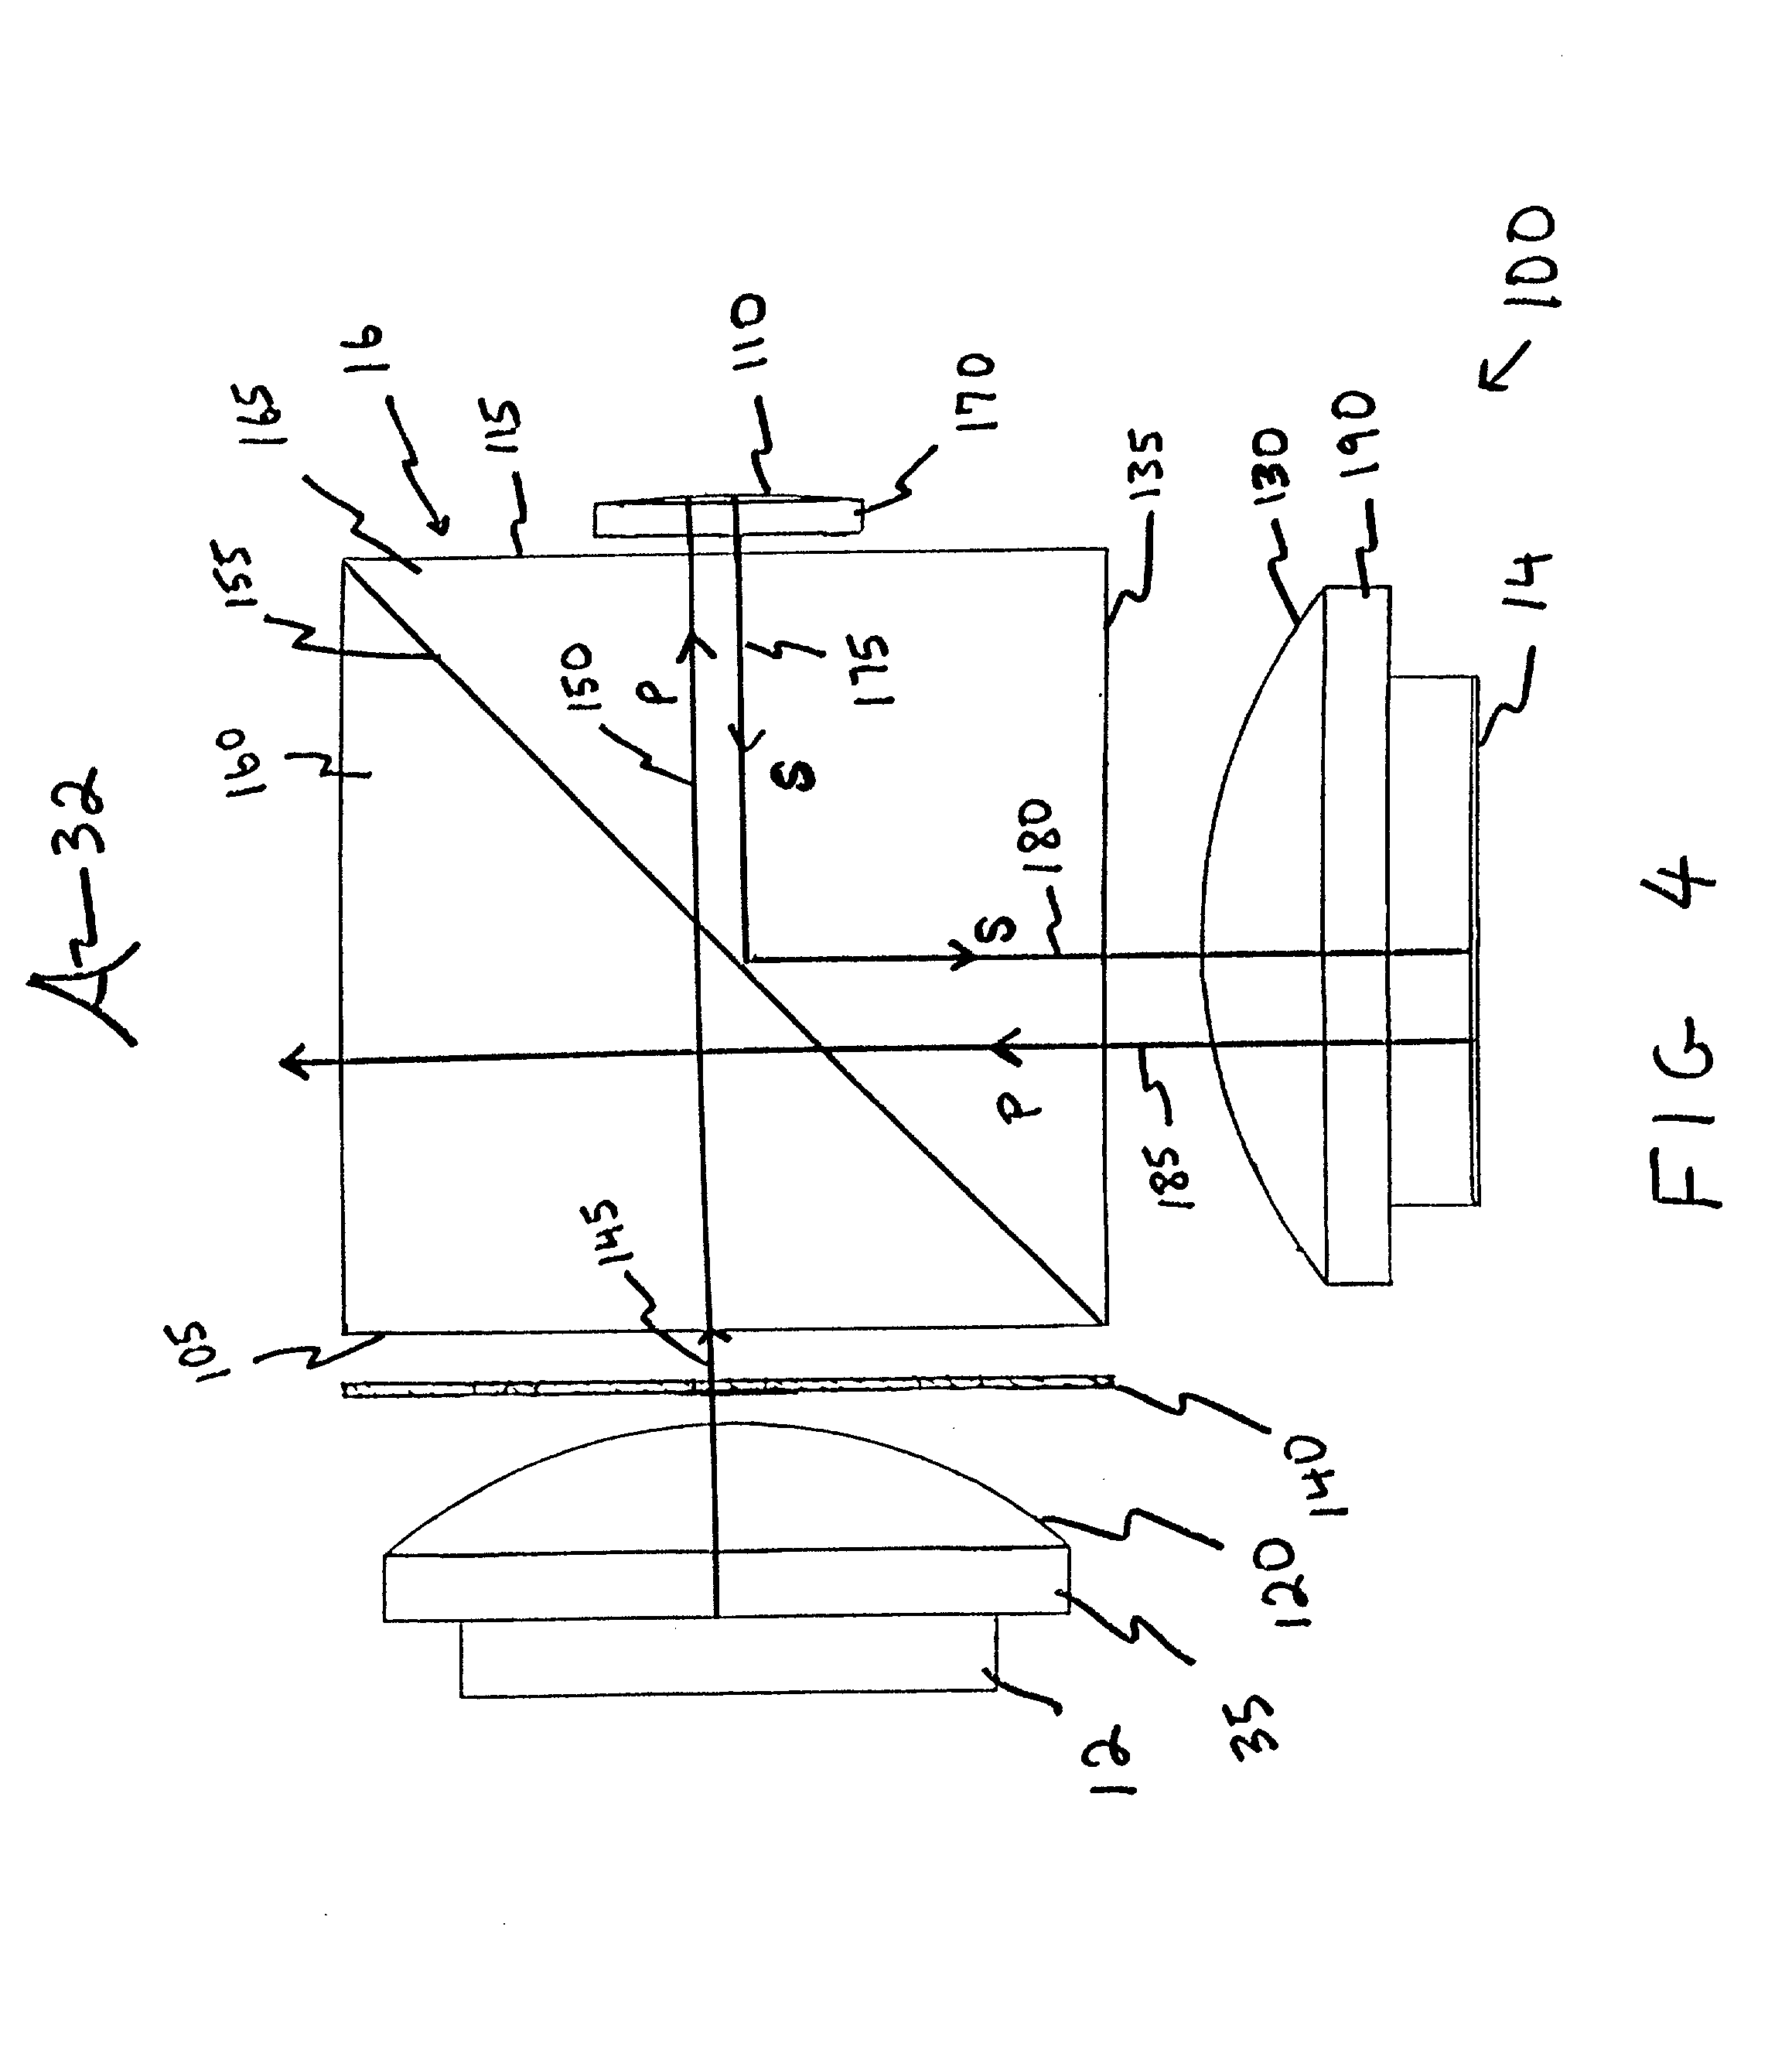 Optical system for miniature personal displays using reflective light valves